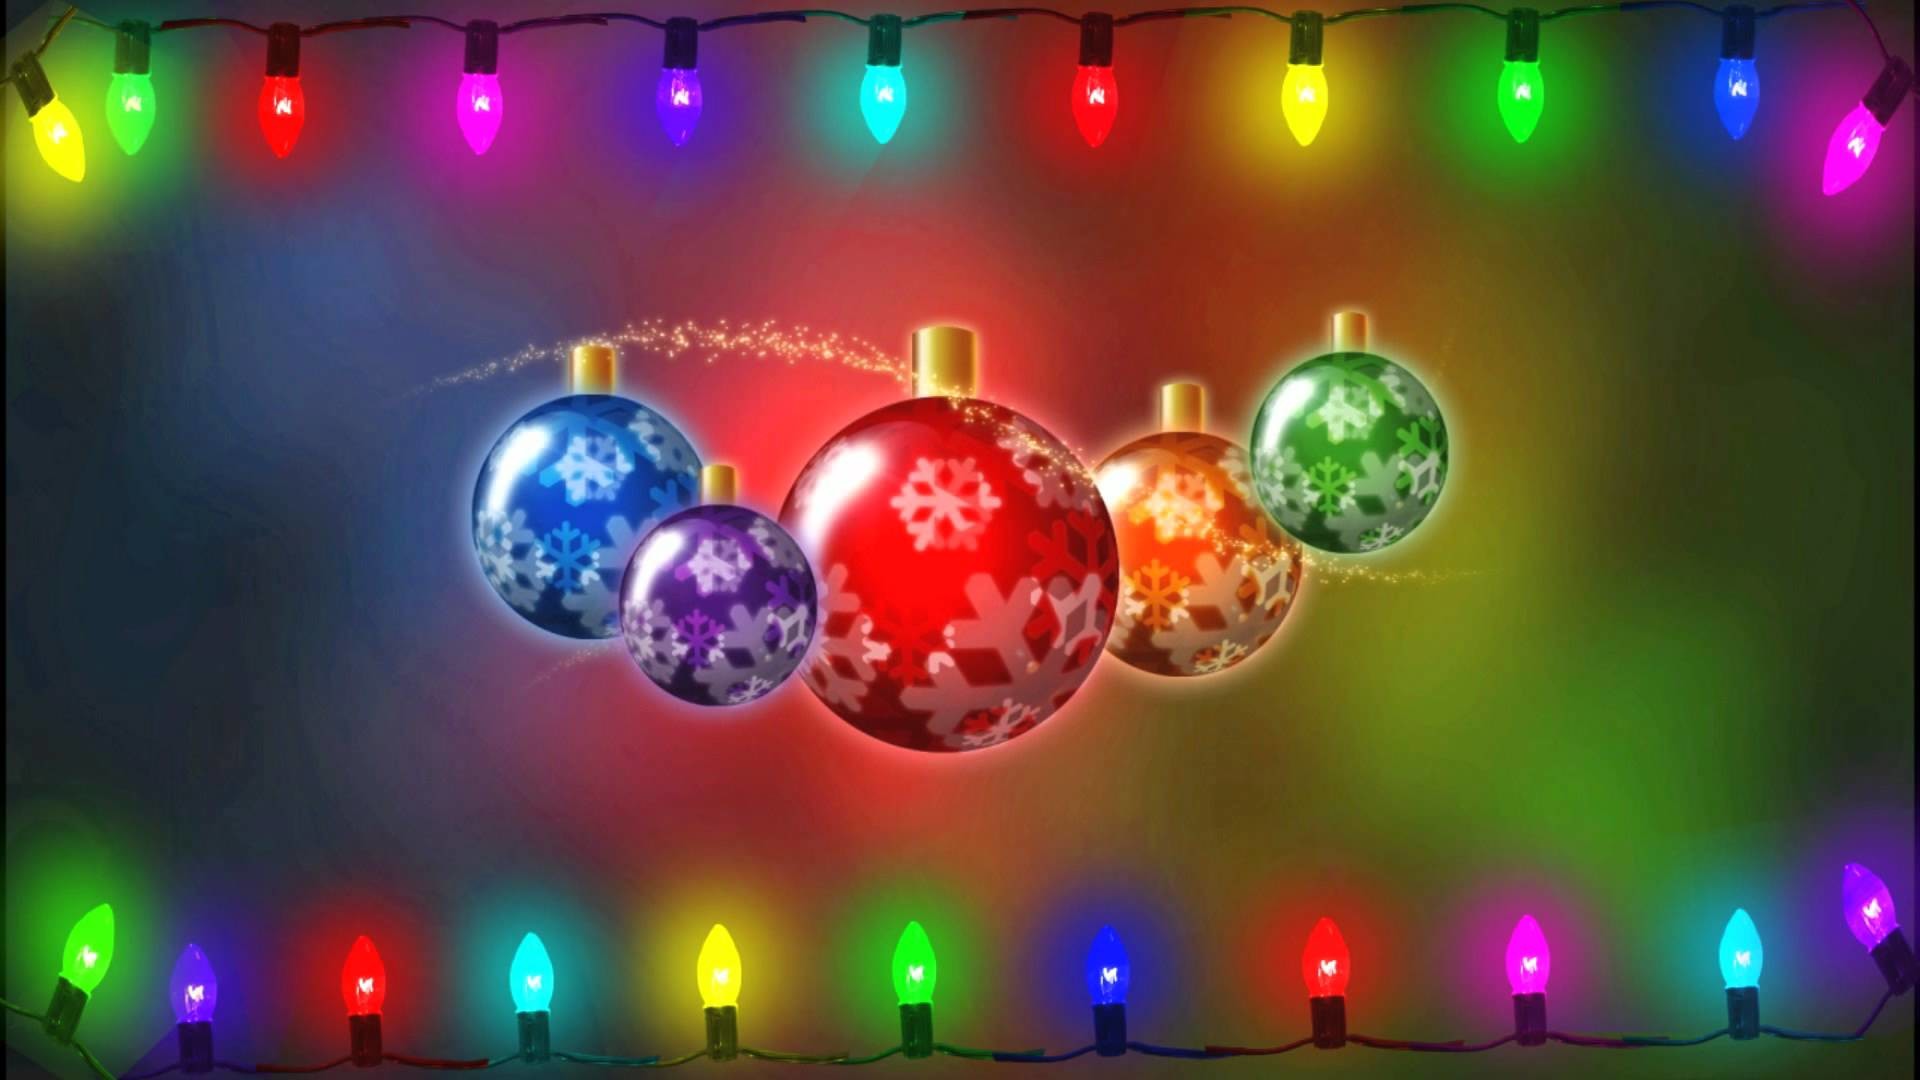 1920x1080 Flickering Christmas Lights on Christmas Ornament Background .